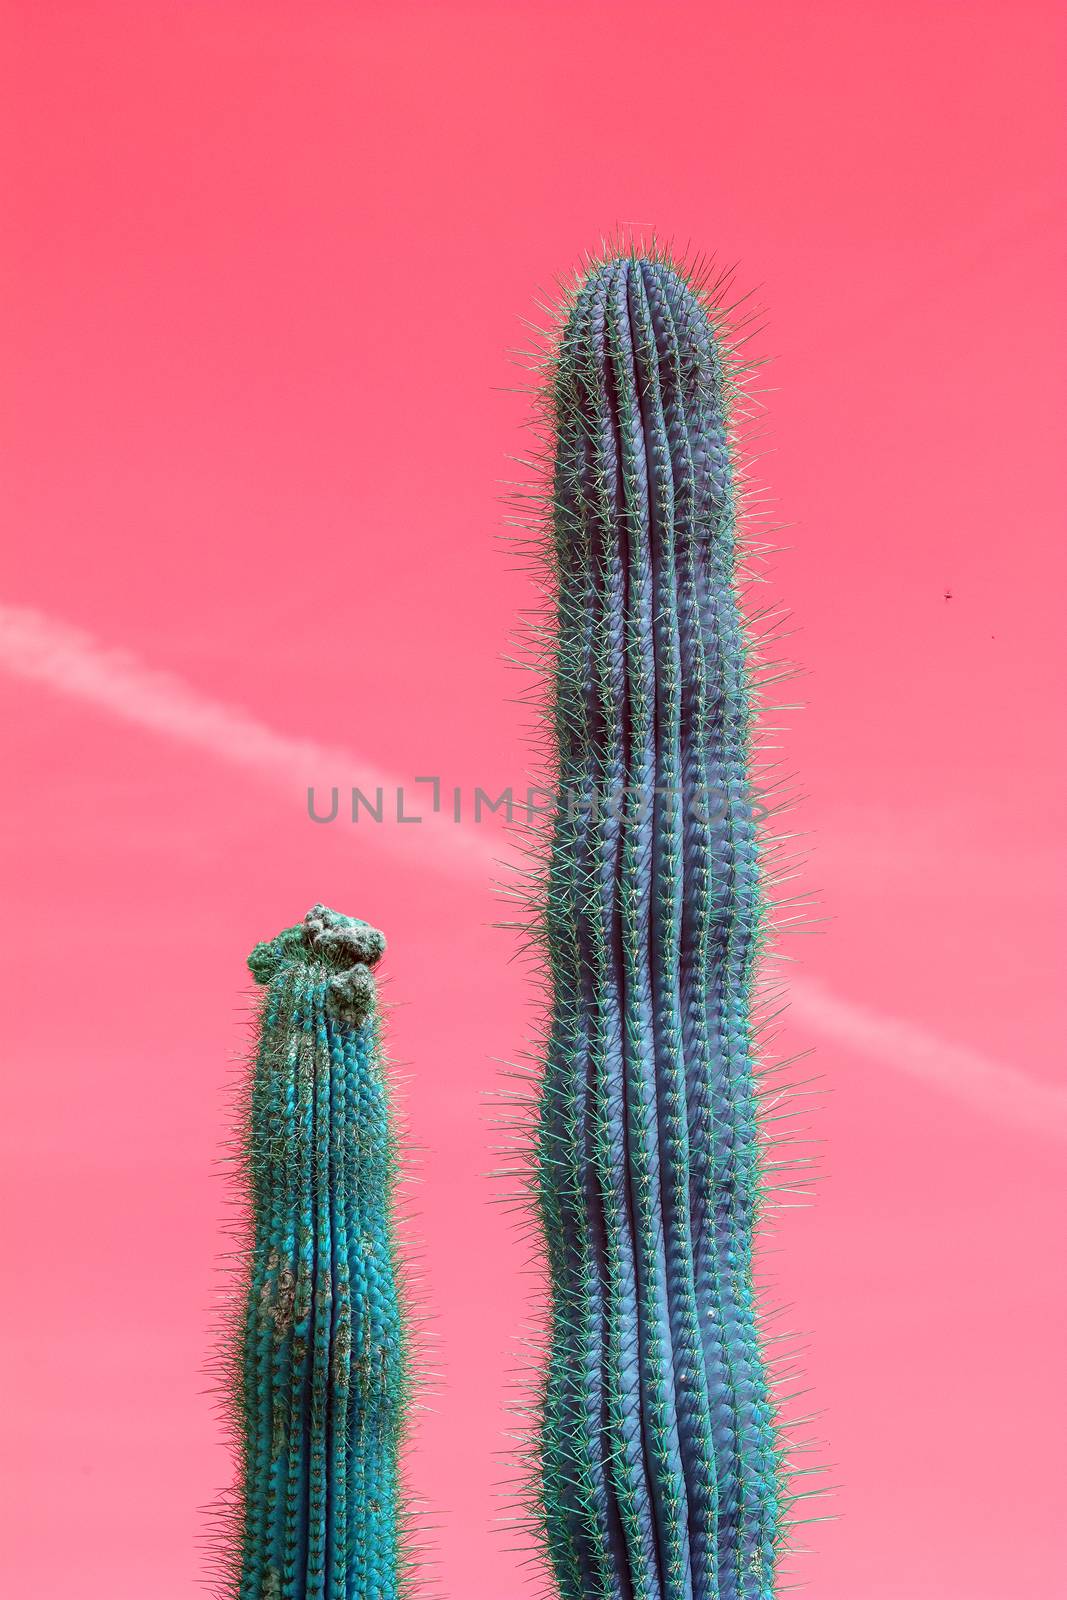 Thorny cactus against pink sky with contrail by ArtesiaWells